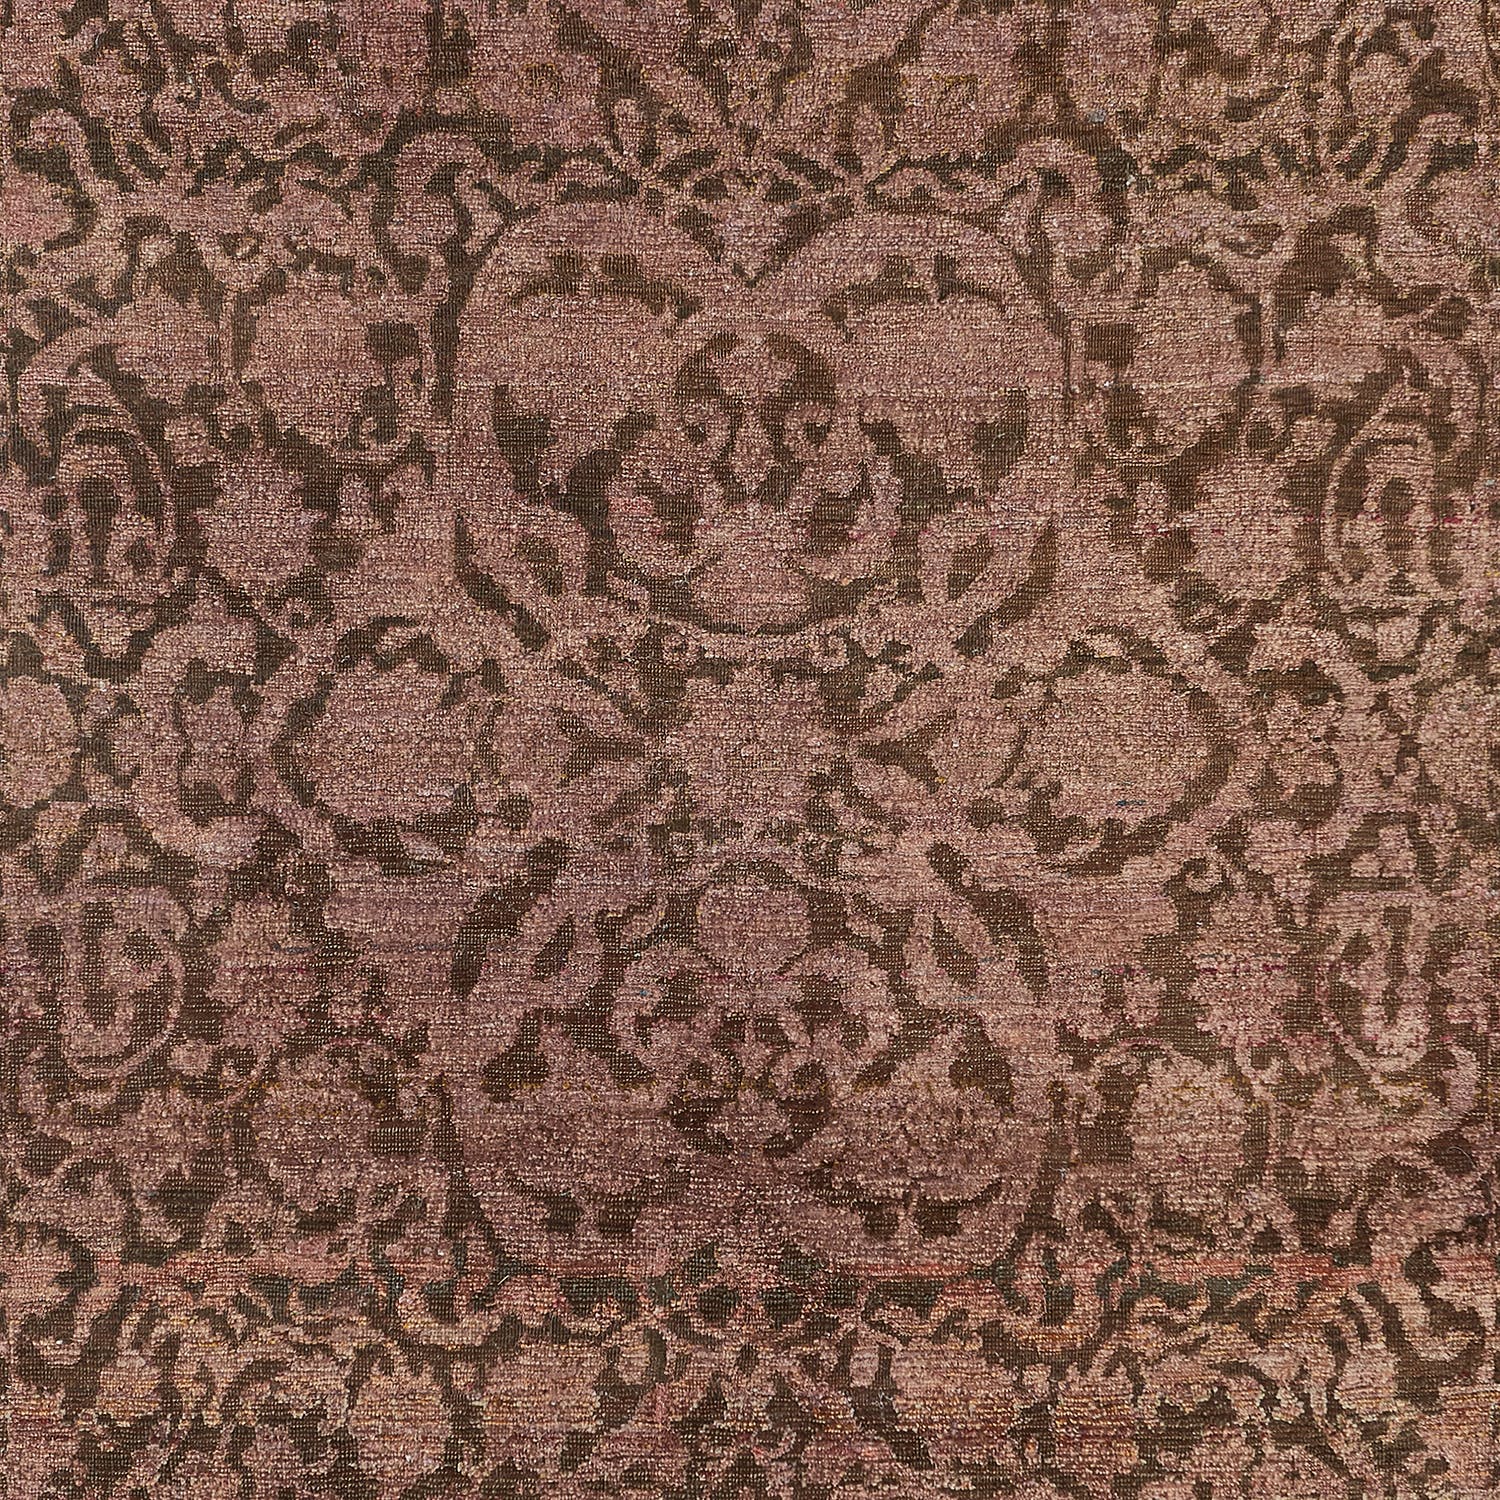 Intricate, classical patterned textile in brown tones with antique charm.